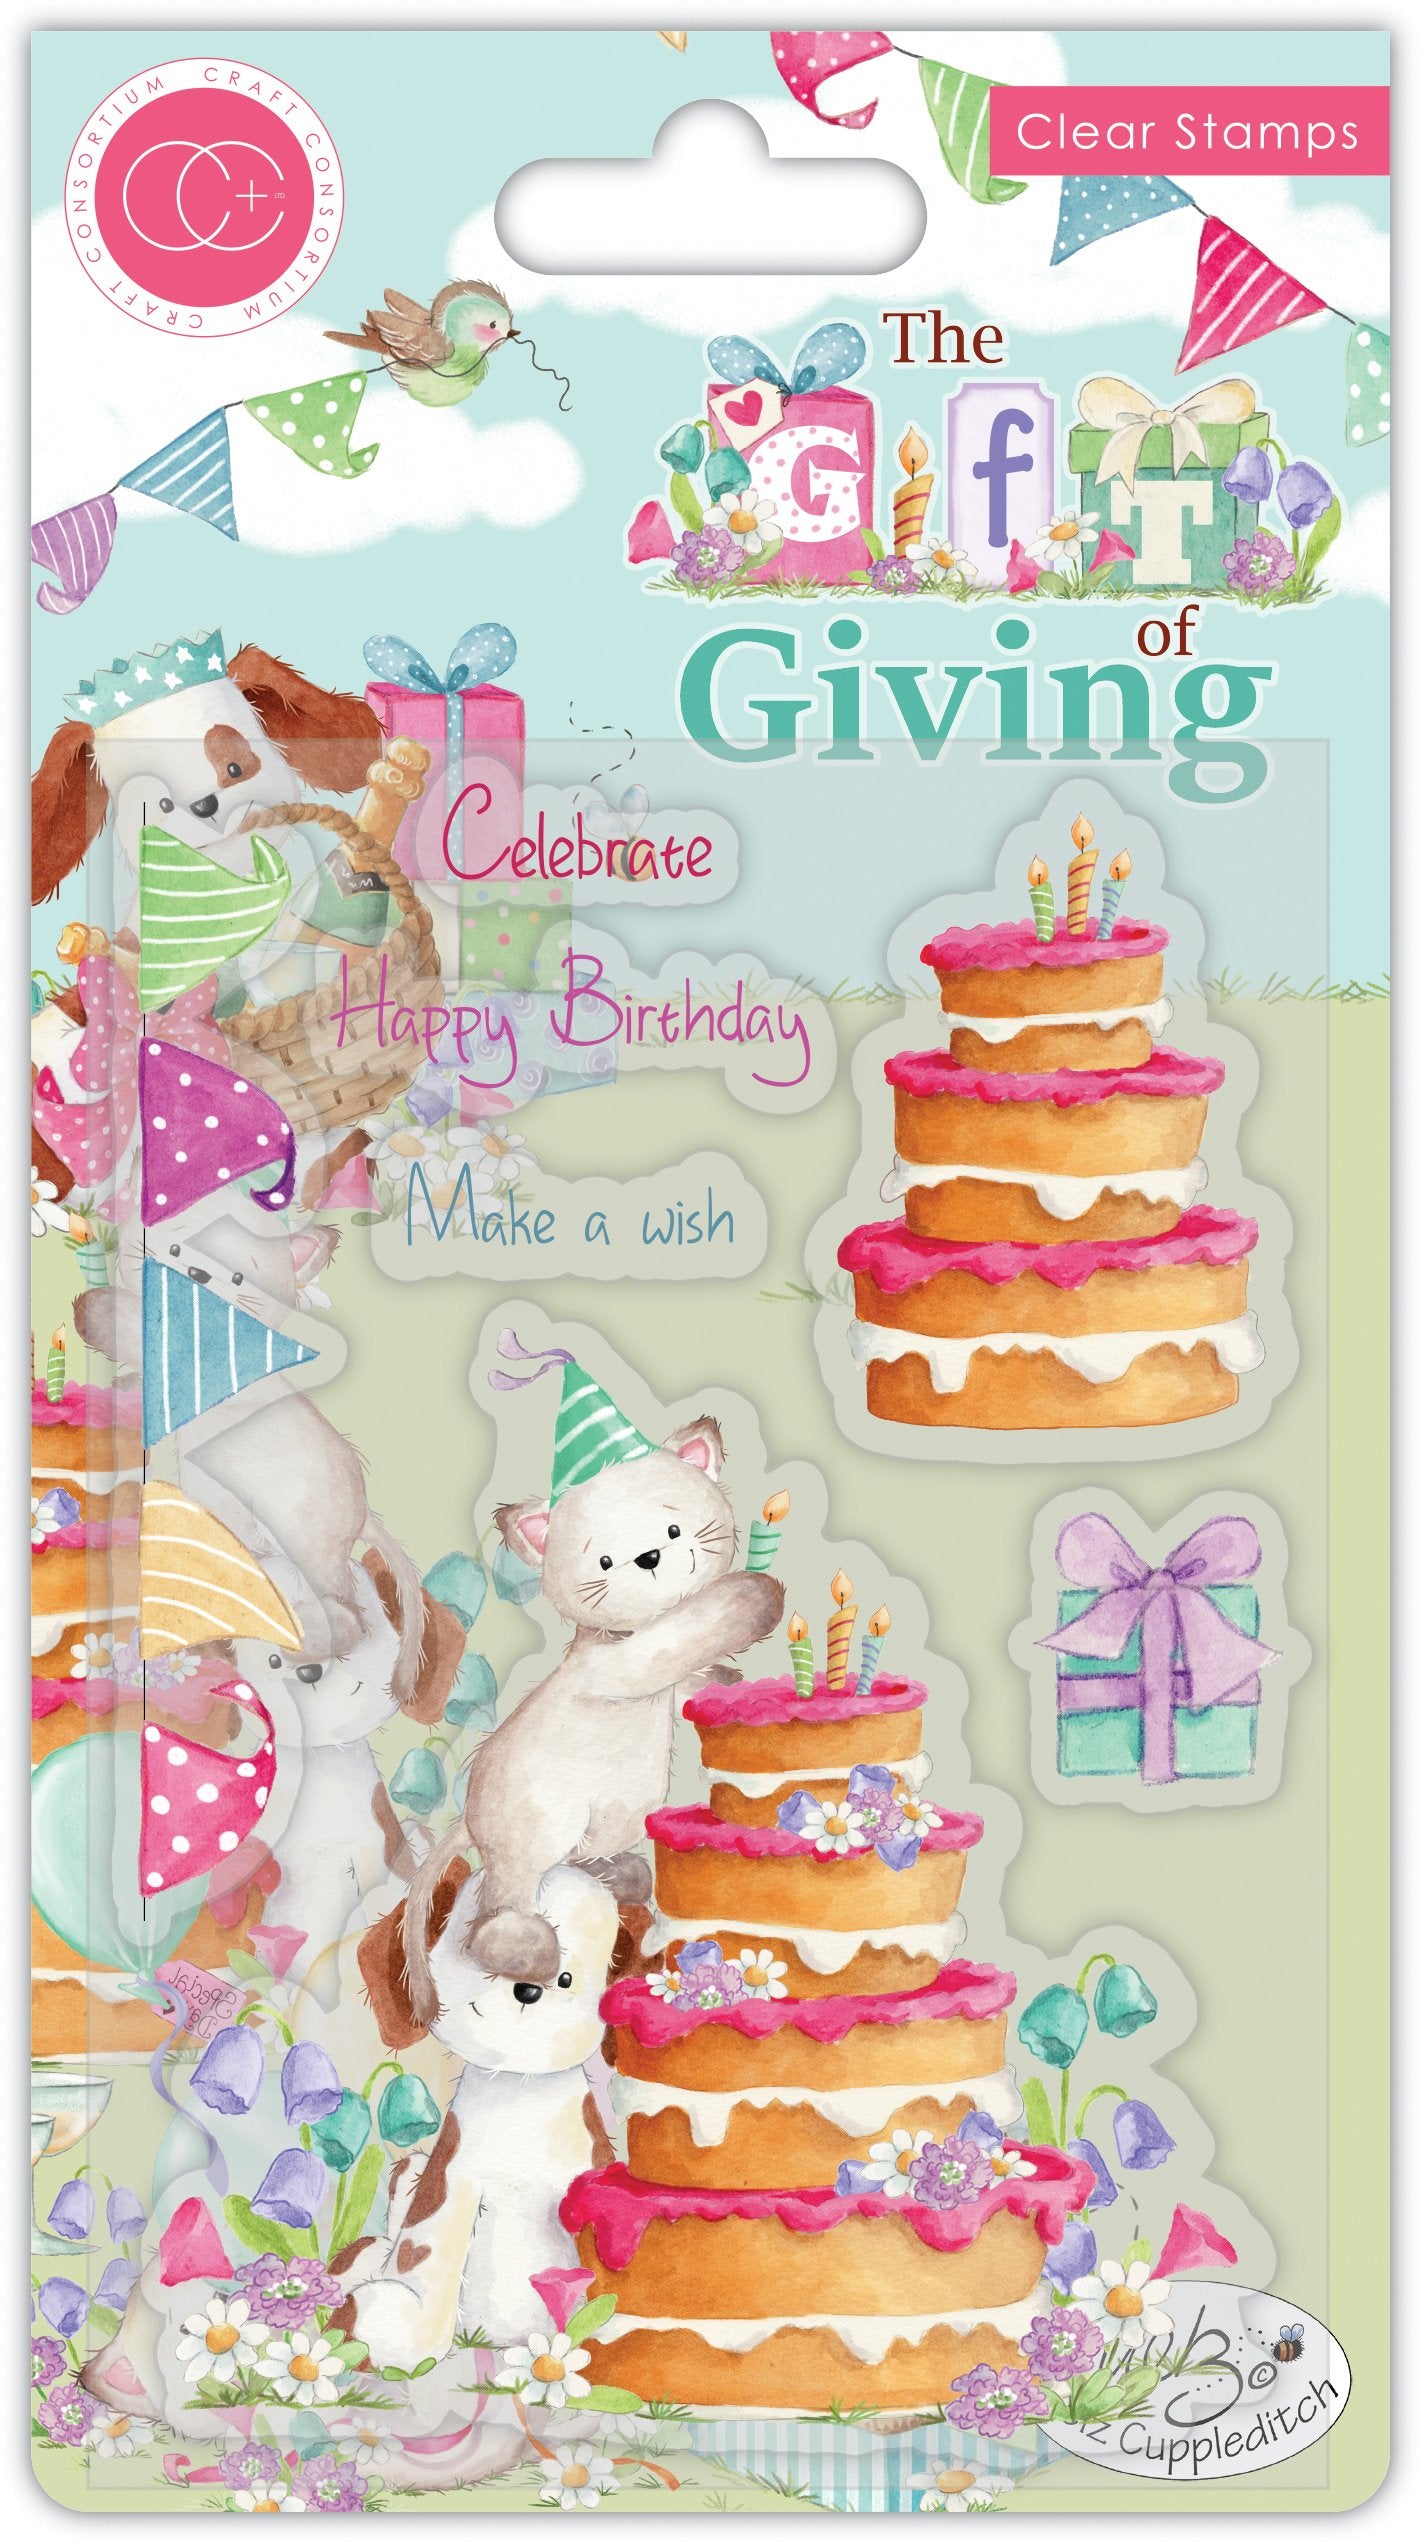 The Gift of Giving Stamp Set - Make a Wish